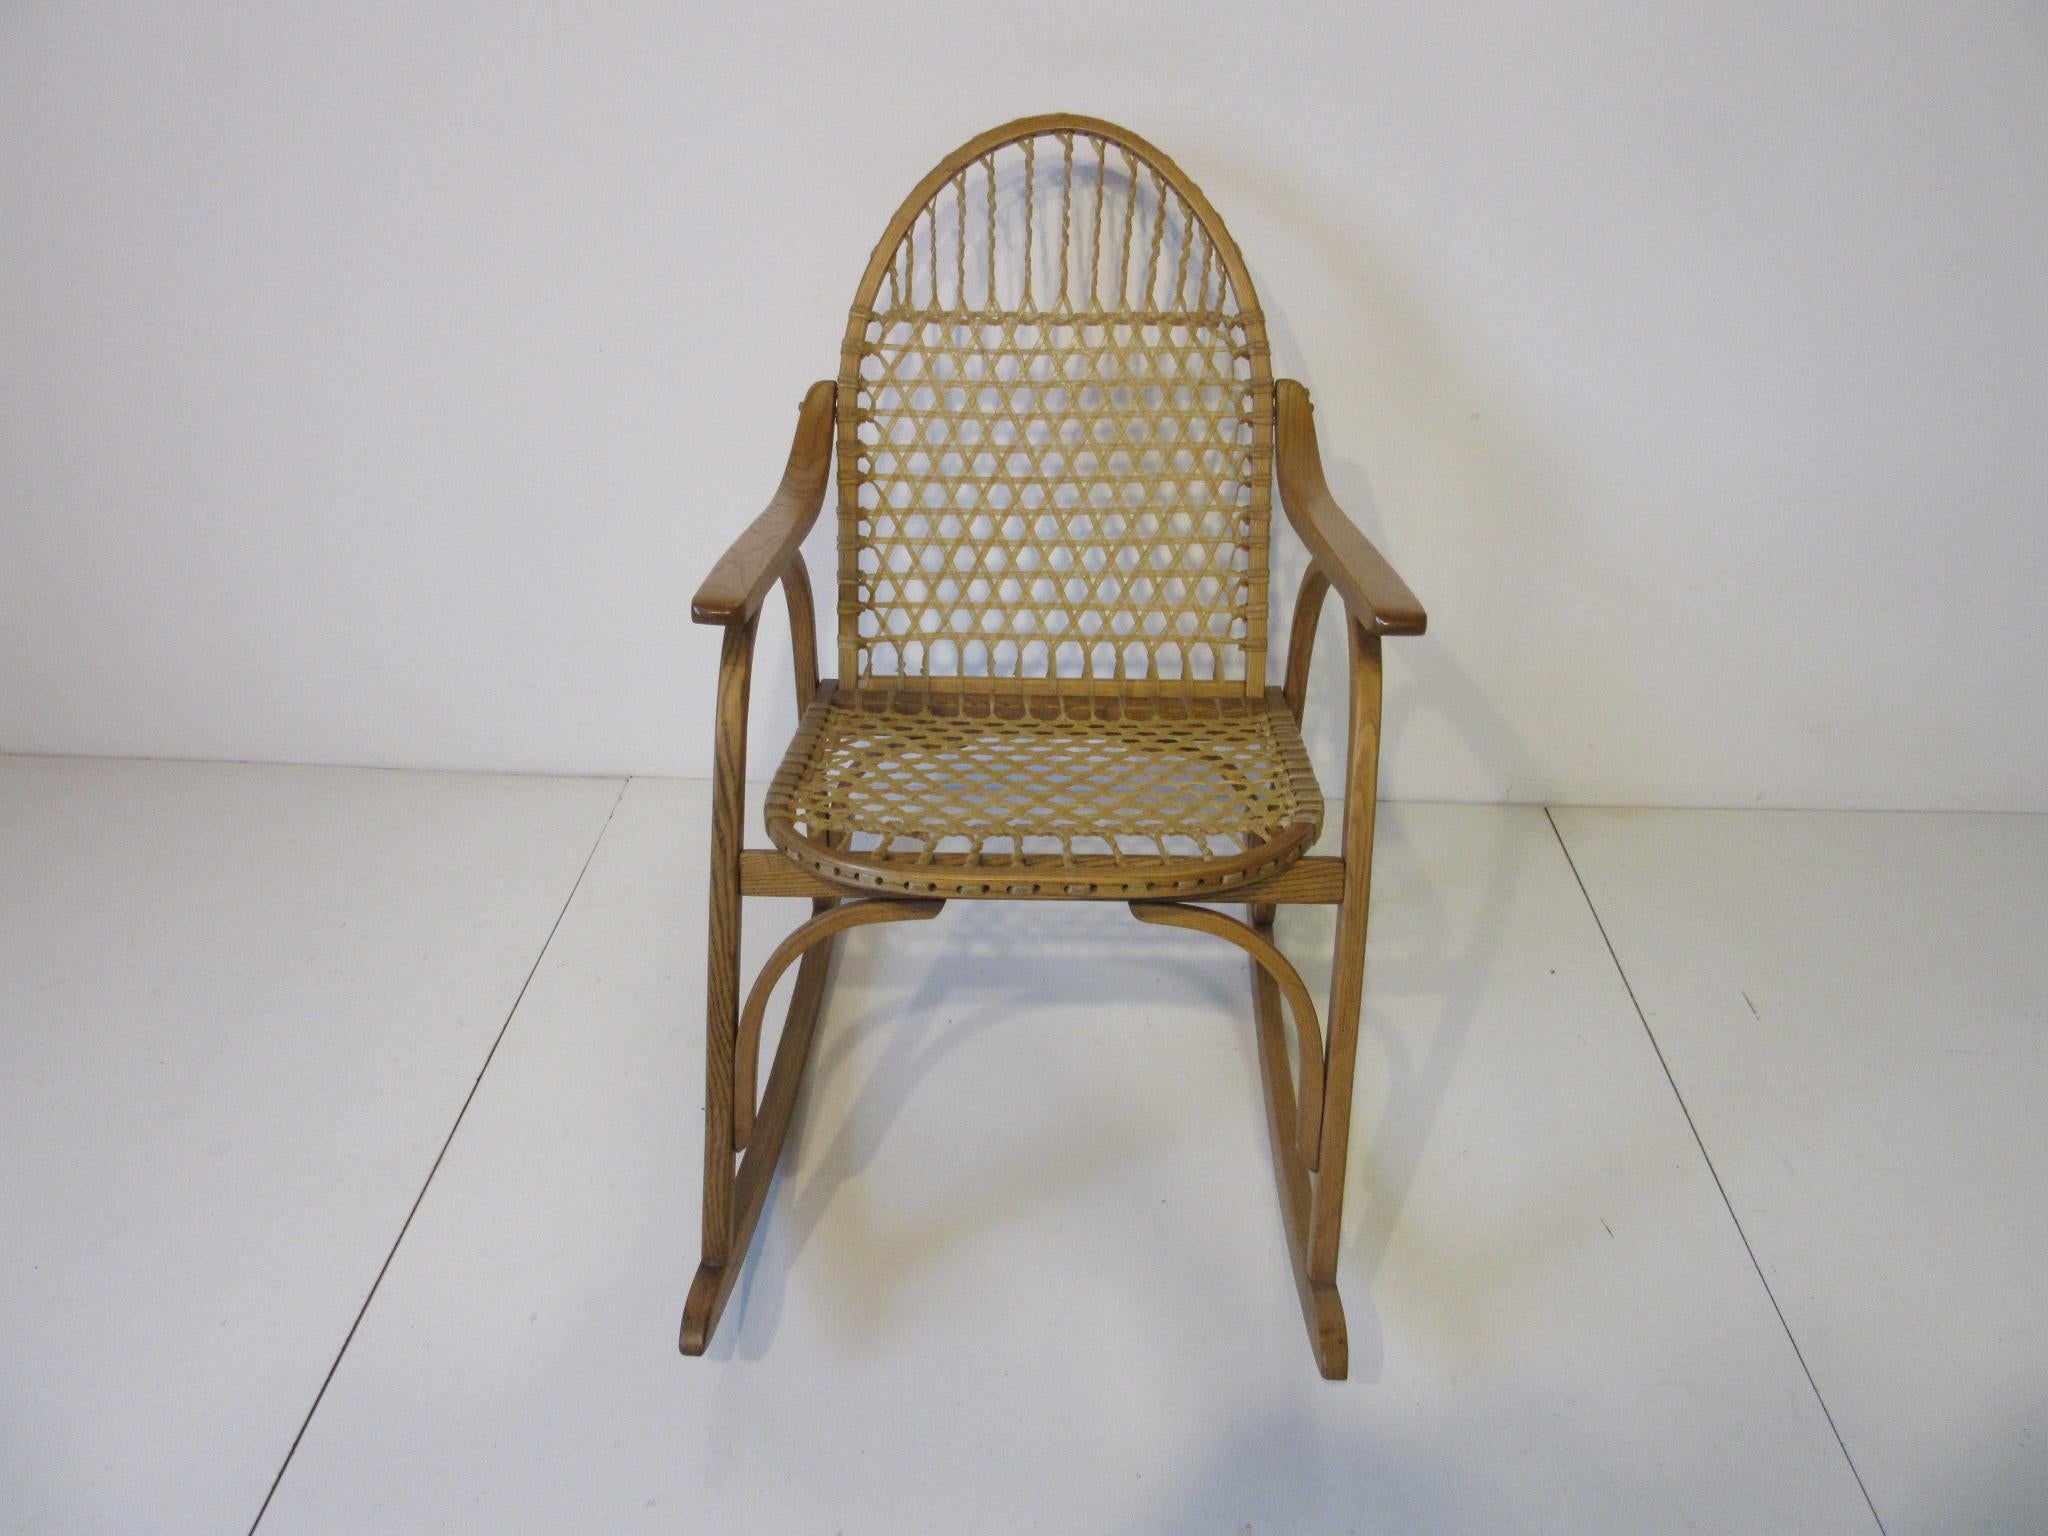 A white ash bentwood framed rocking chair with water buffalo gut strung seat bottom and back in the manner of a snow shoe. This handcrafted chair was made by Vermont Tubbs which has been producing them since 1840. A true classic for that cabin,